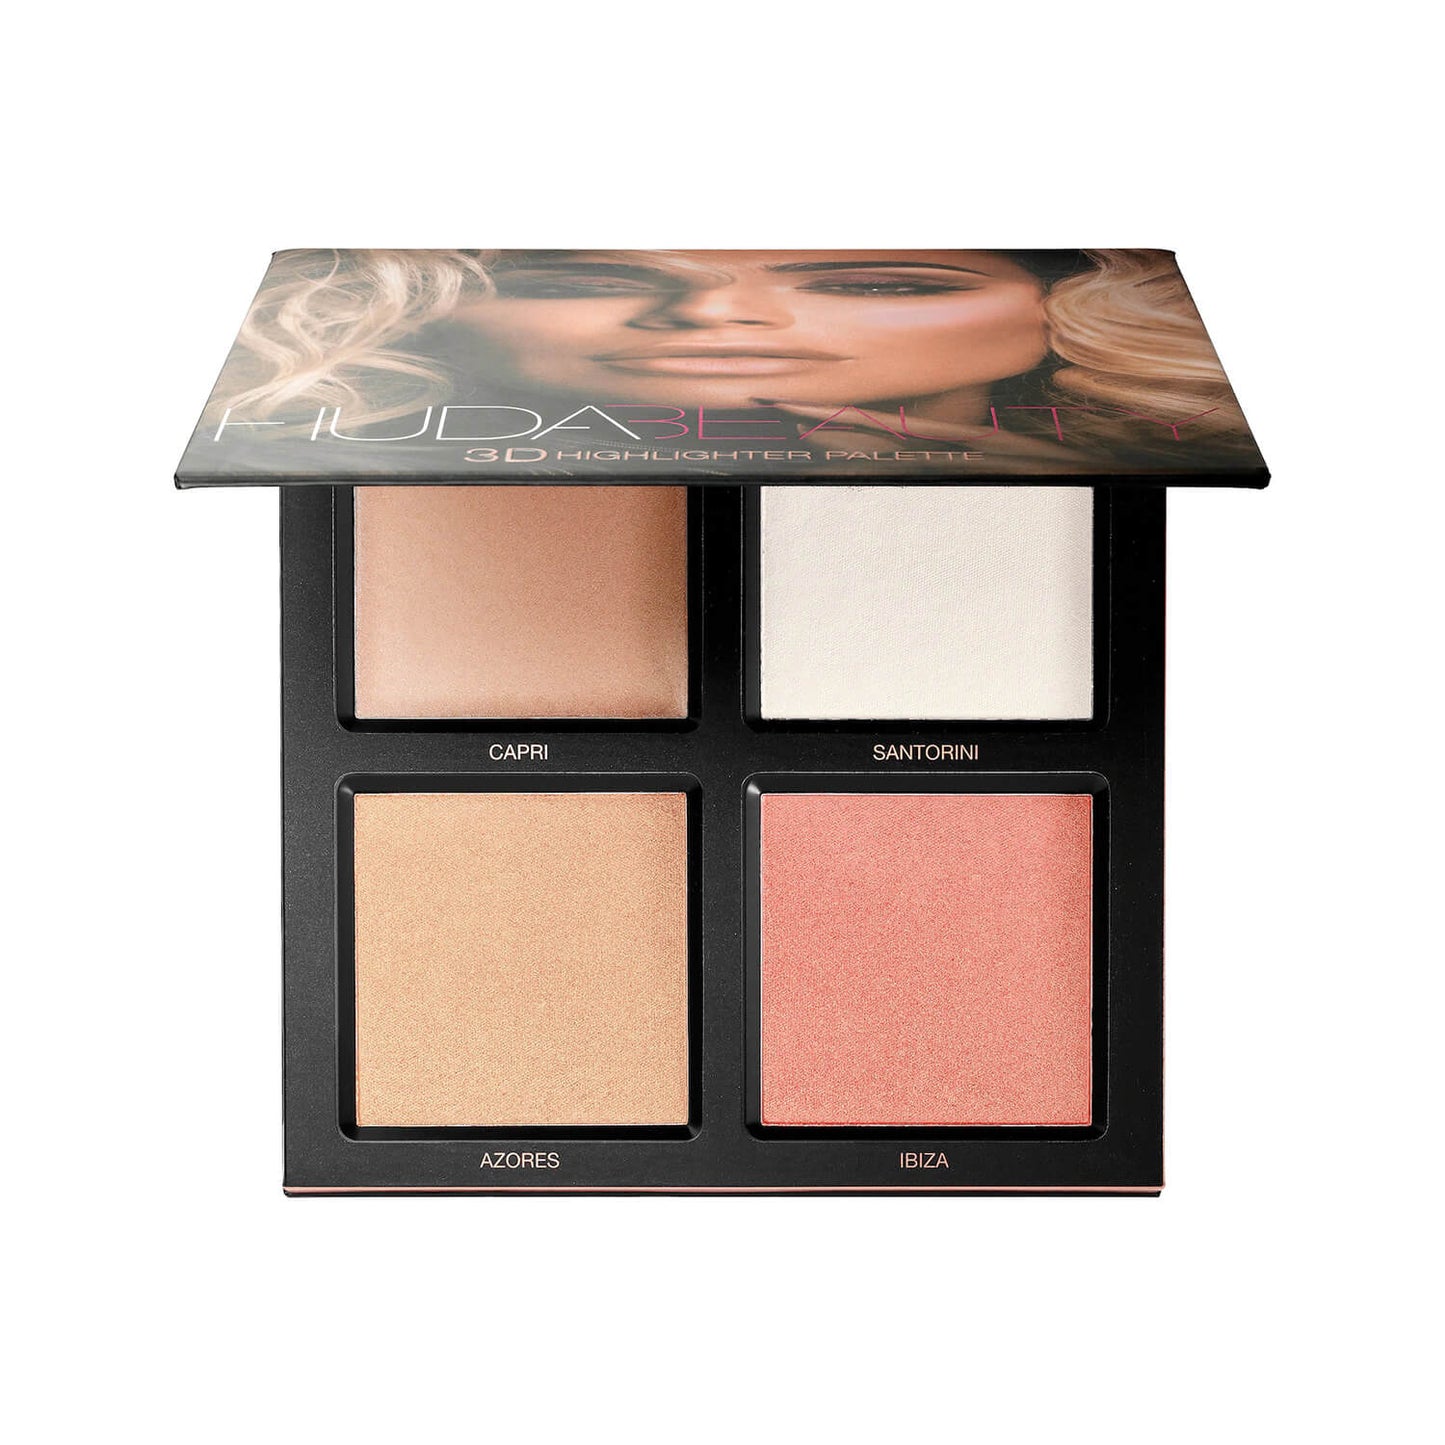 Huda 3D Cream and Powder Highlighter Palette - Pink Sand available at Heygirl.pk in Karachi, Lahore, Islamabad, Pakistan